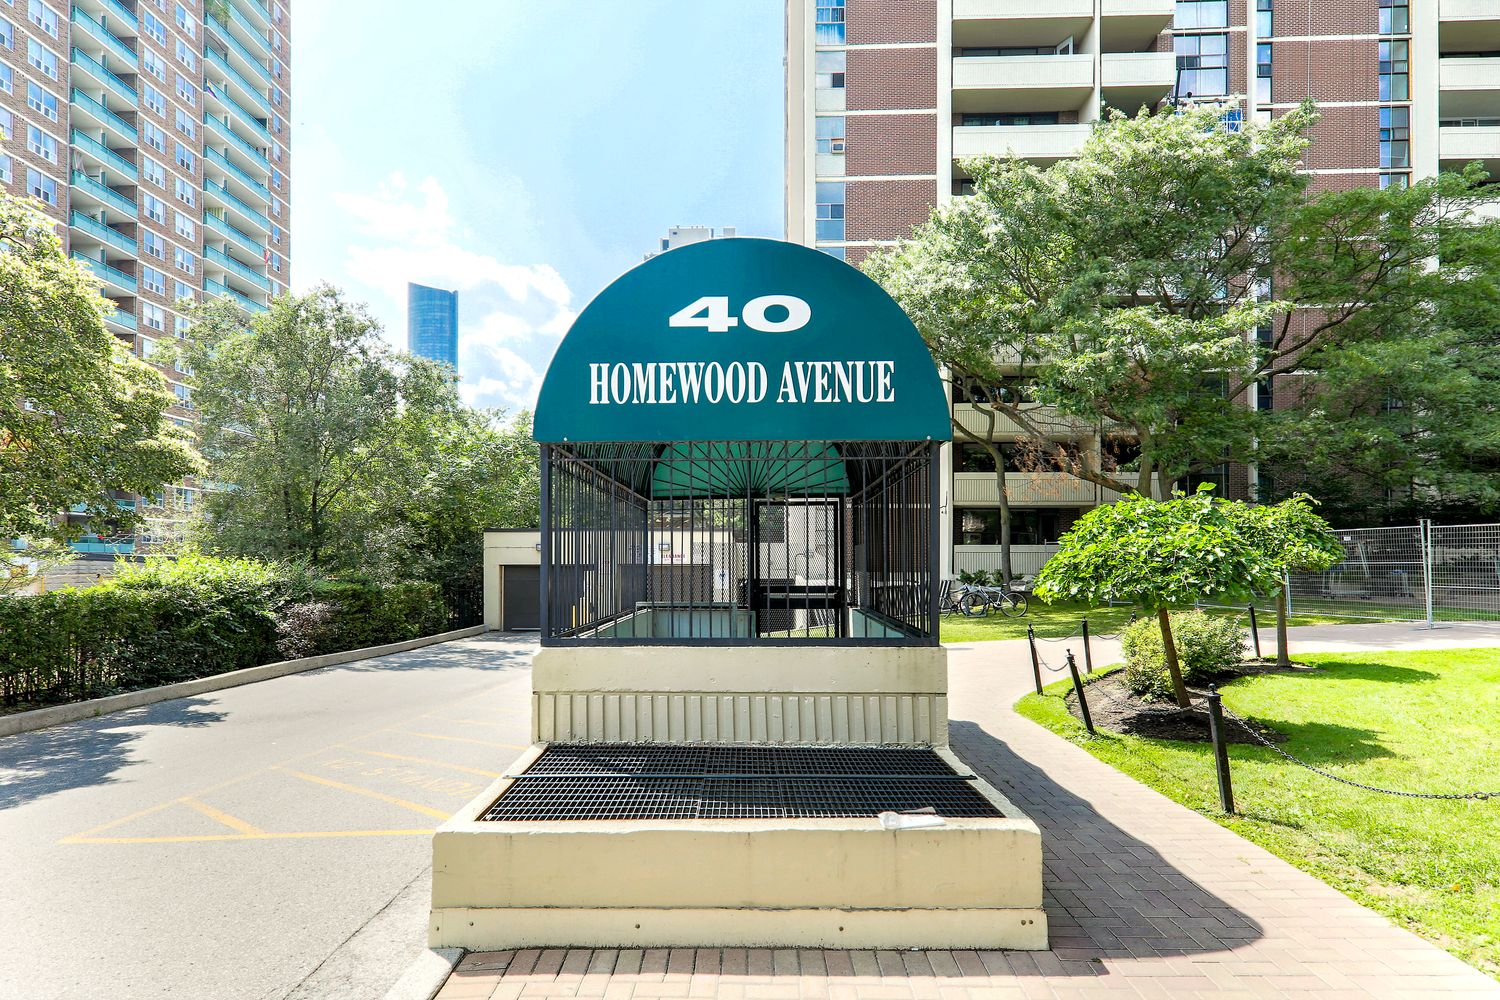 40 Homewood Avenue. 40 Homewood Avenue Condos is located in  Downtown, Toronto - image #4 of 7